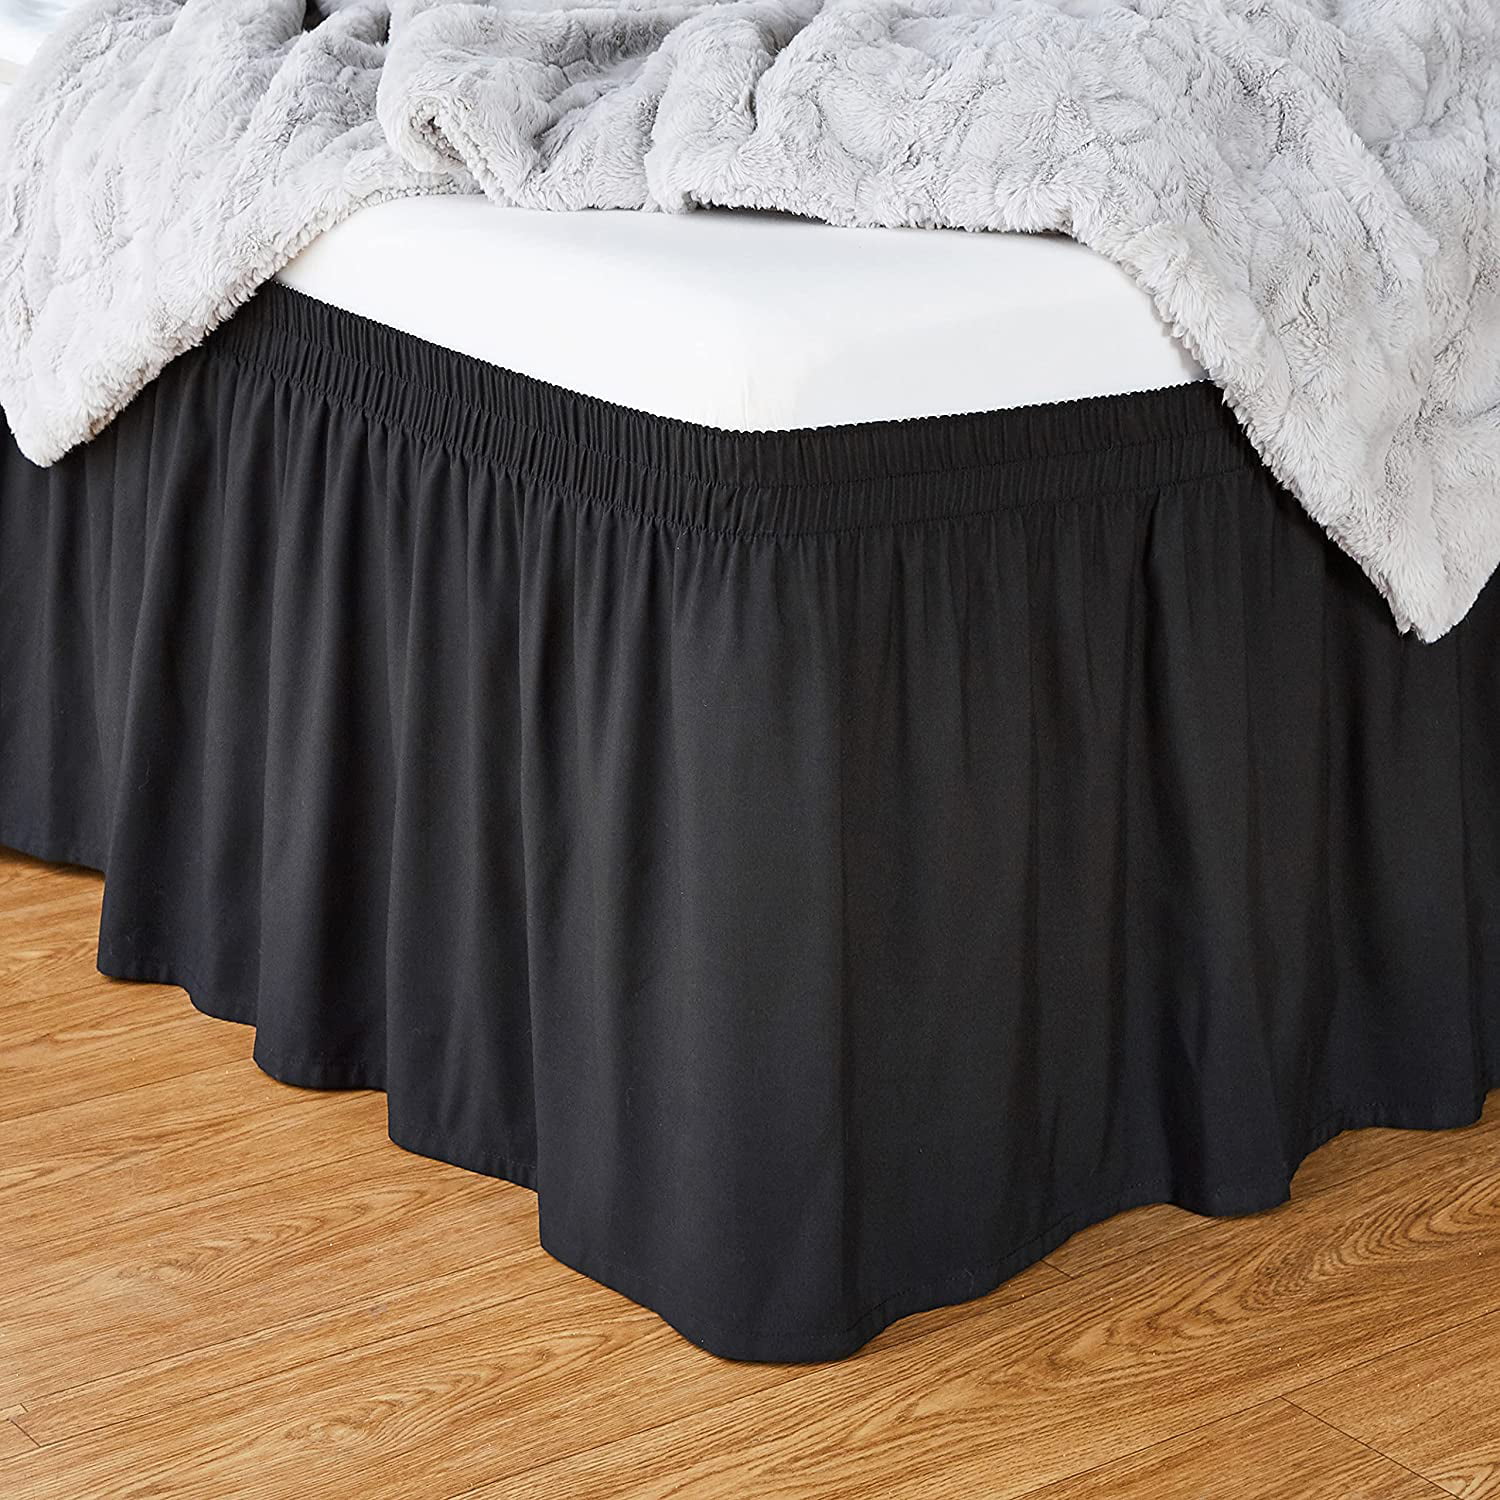 Elastic Wrap Around Bed Skirts 100% Microfiber Queen/King All Size/Drop/Color 